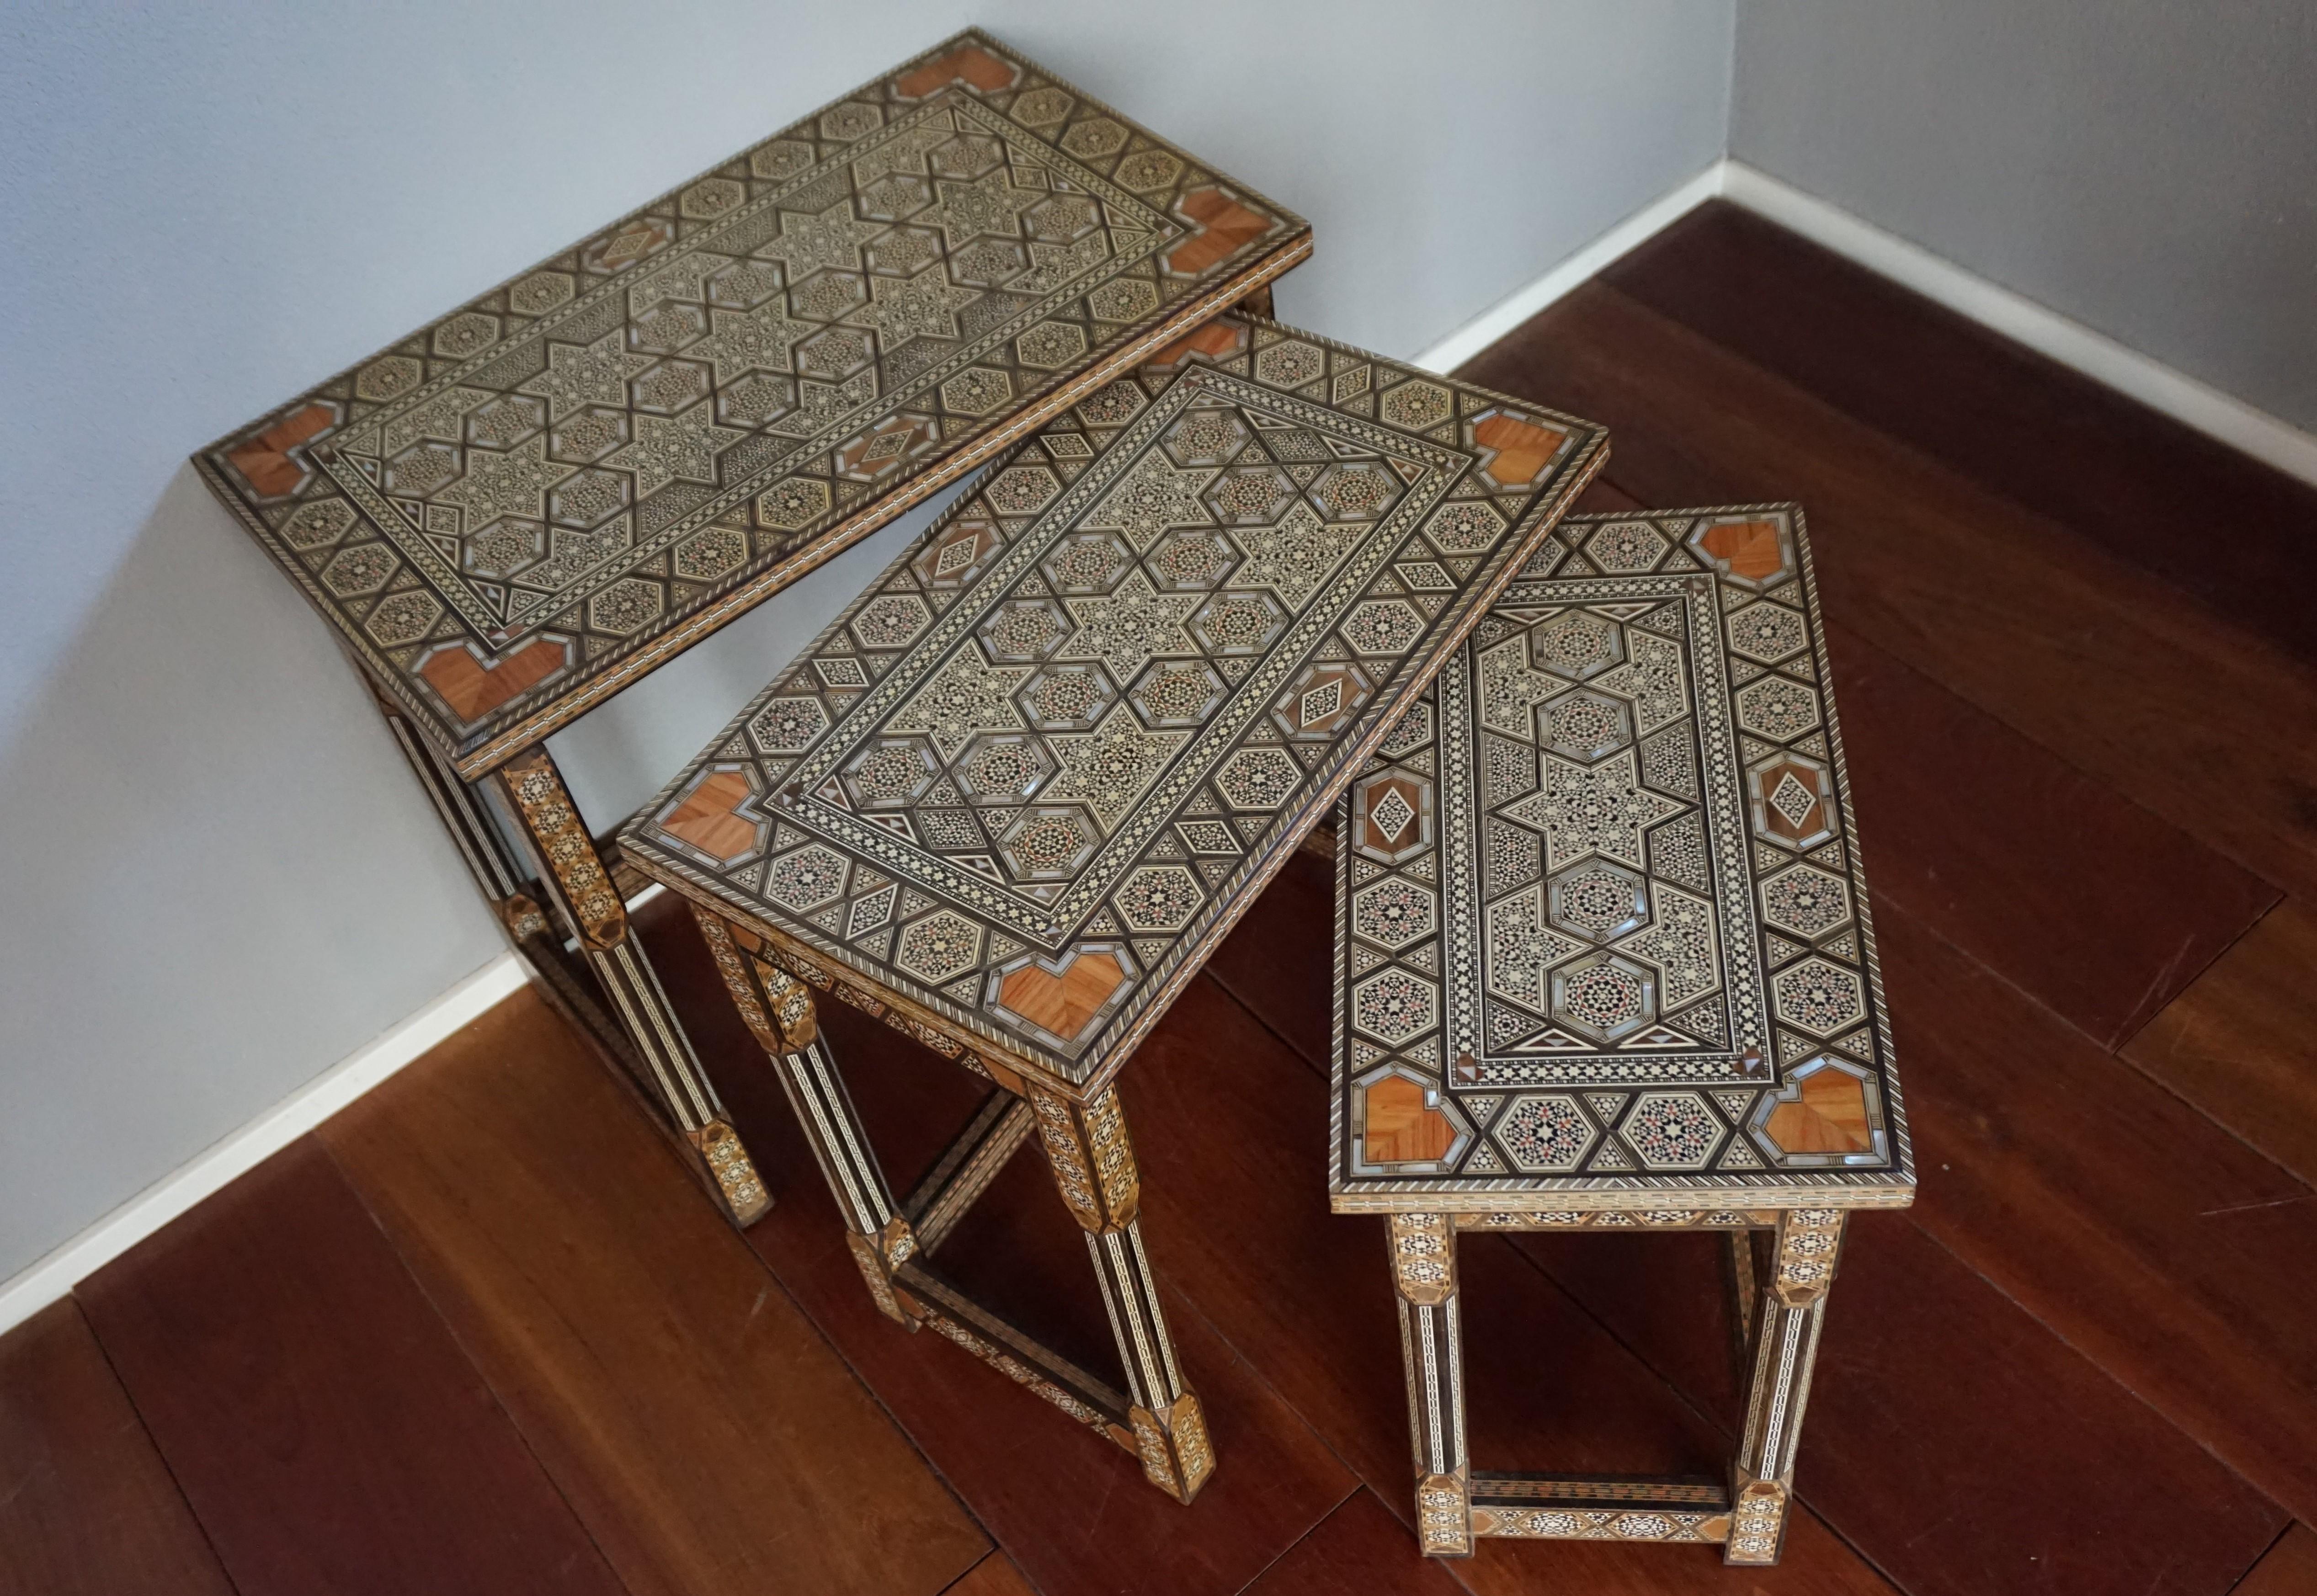 Rare and stunning set of Arabic stacking tables with inlaid Islamic patterns.

If you are looking for rare, beautiful, handcrafted, meaningful and highly decorative pieces to grace your home then these stacking tables could be perfect for you. This